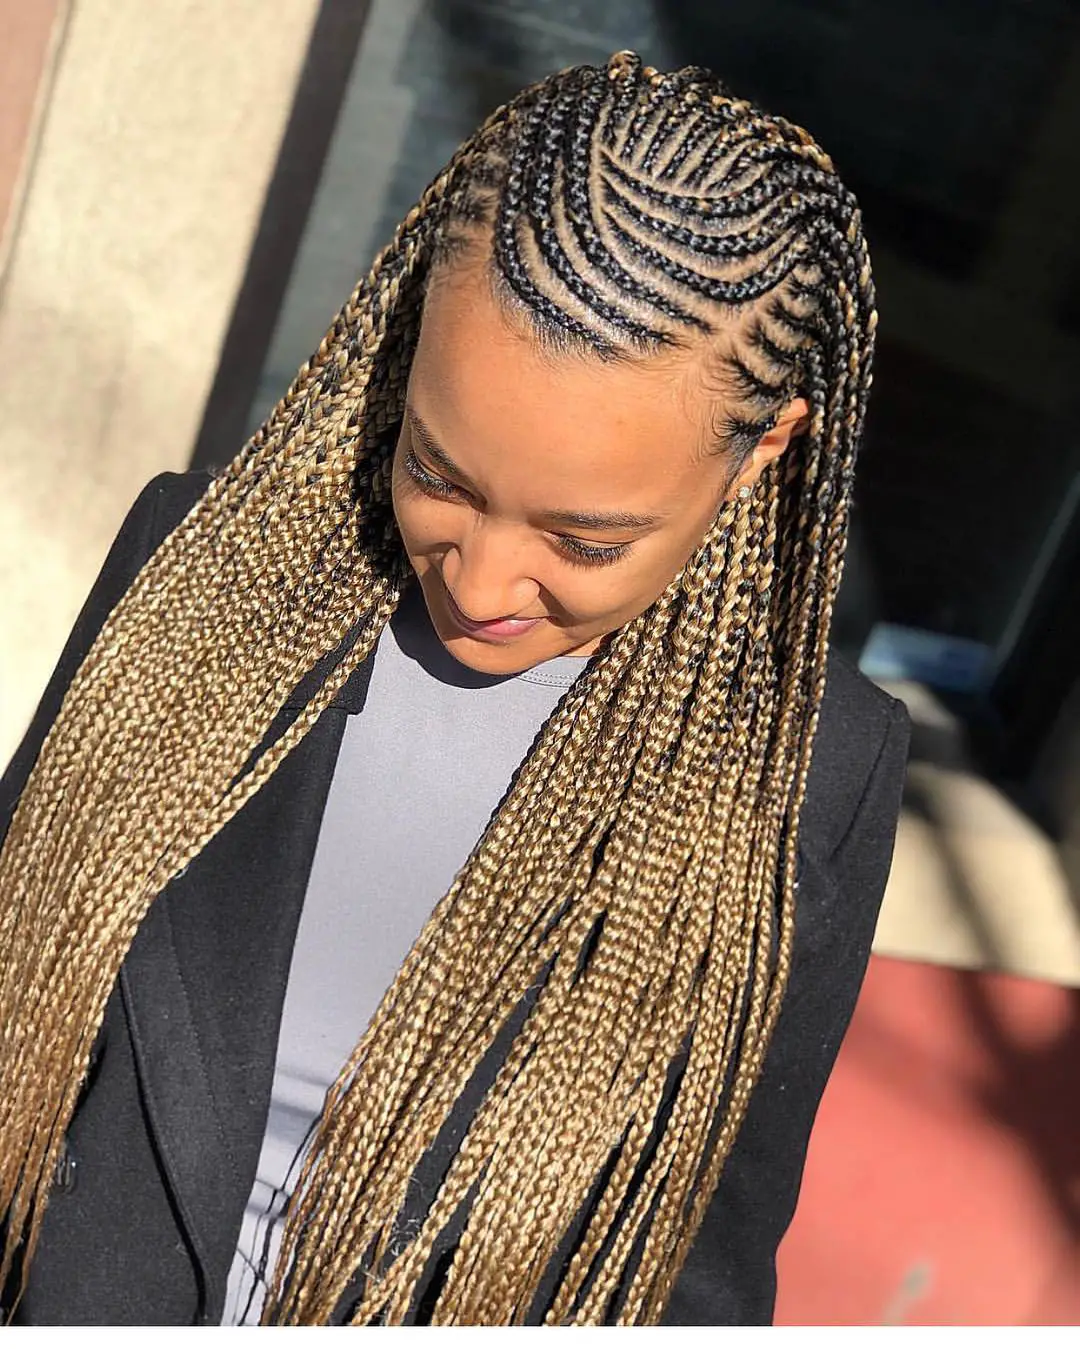 Hairstyles Braids 2020 African Braids Hairstyles 2020 For 